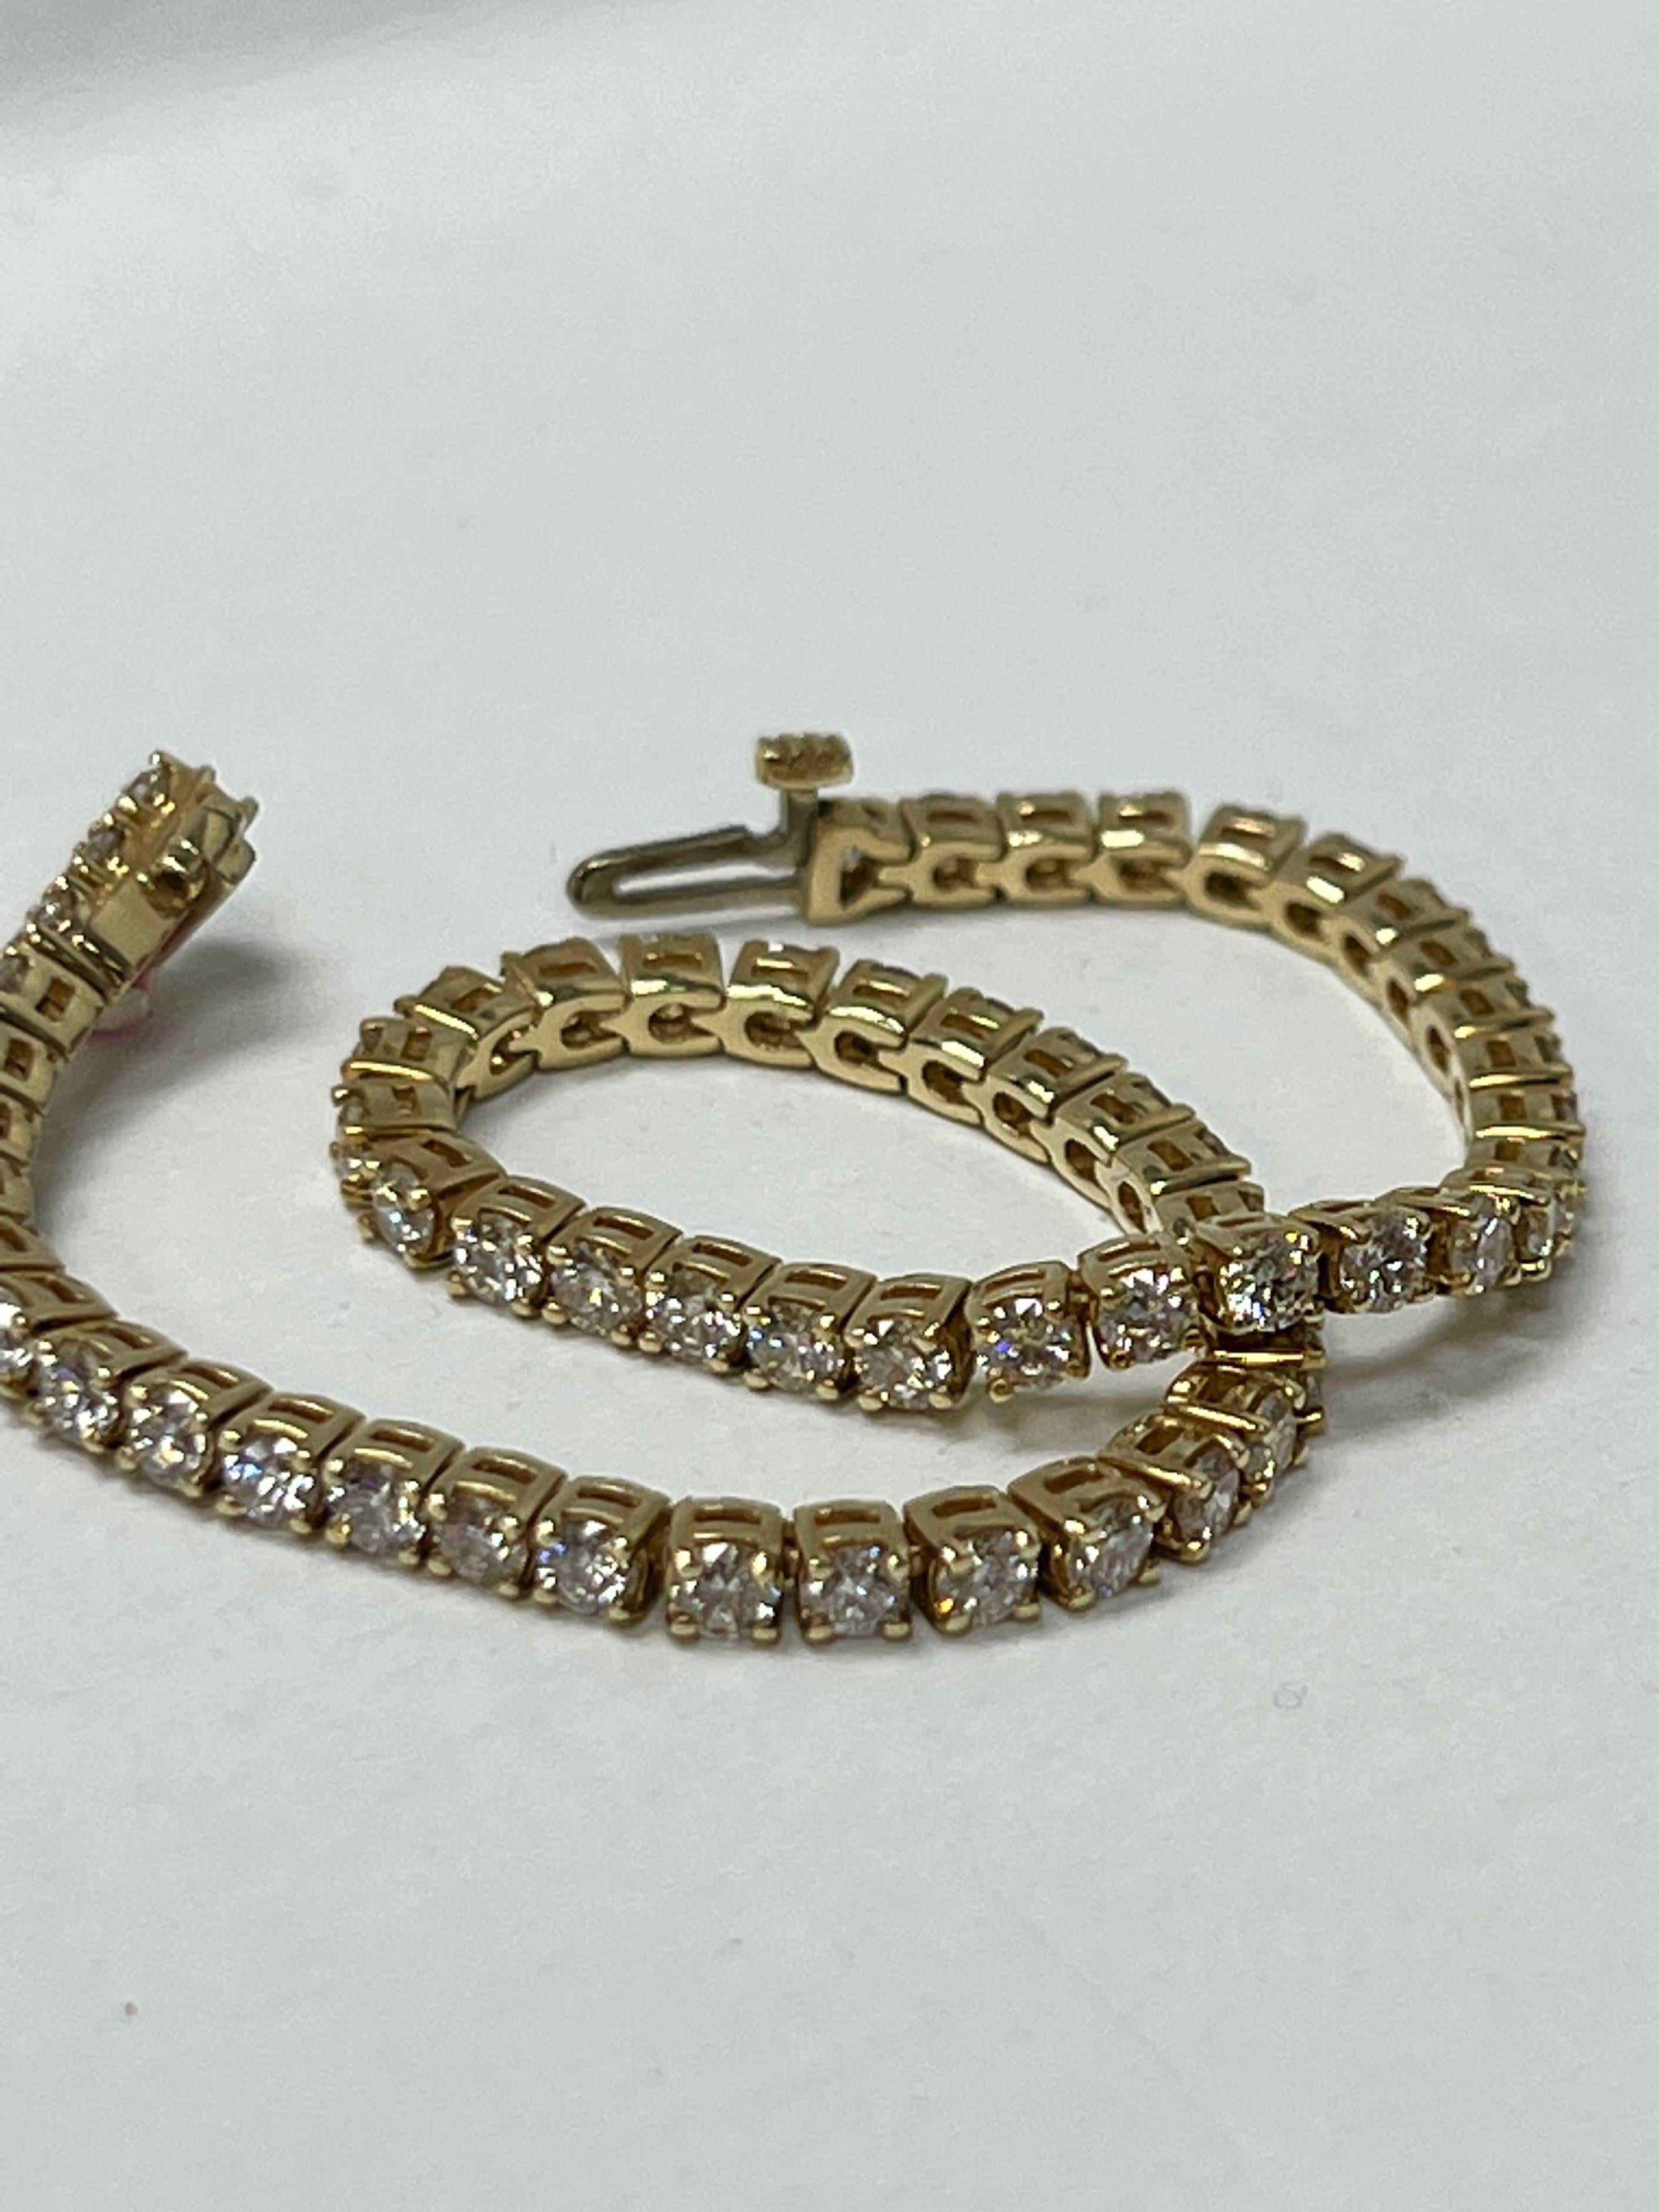 6 Carat Yellow Gold Diamond Bracelet In New Condition For Sale In Great Neck, NY